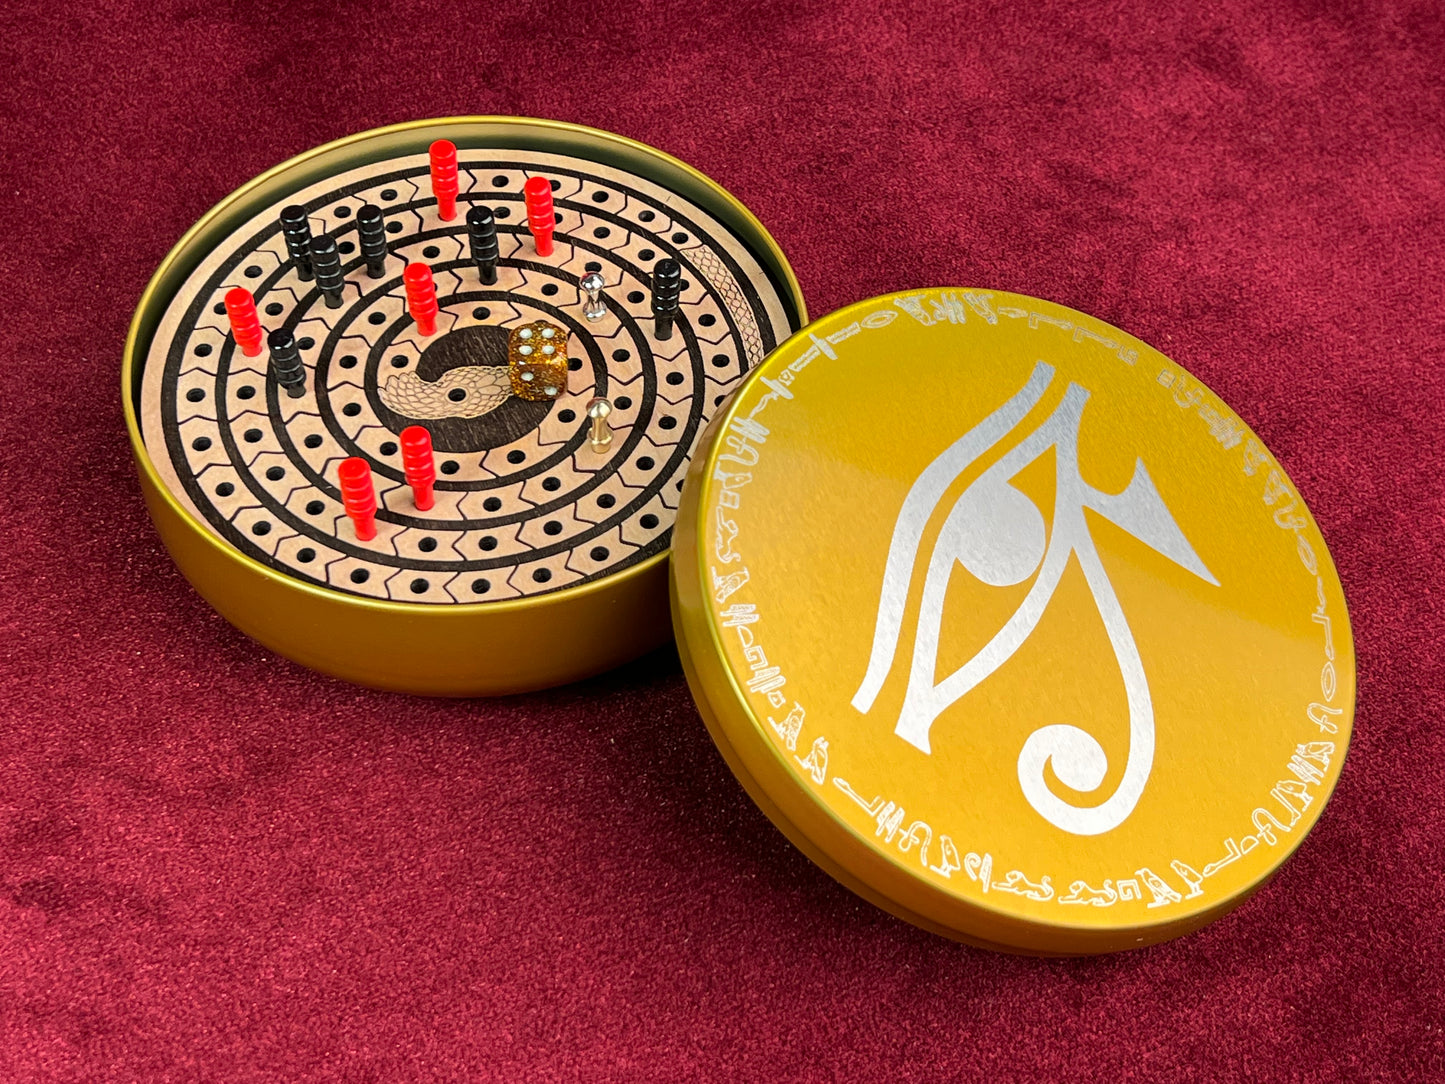 MEHEN - The Ancient Egyptian Game Encased in Beautiful Engraved Metal Box.